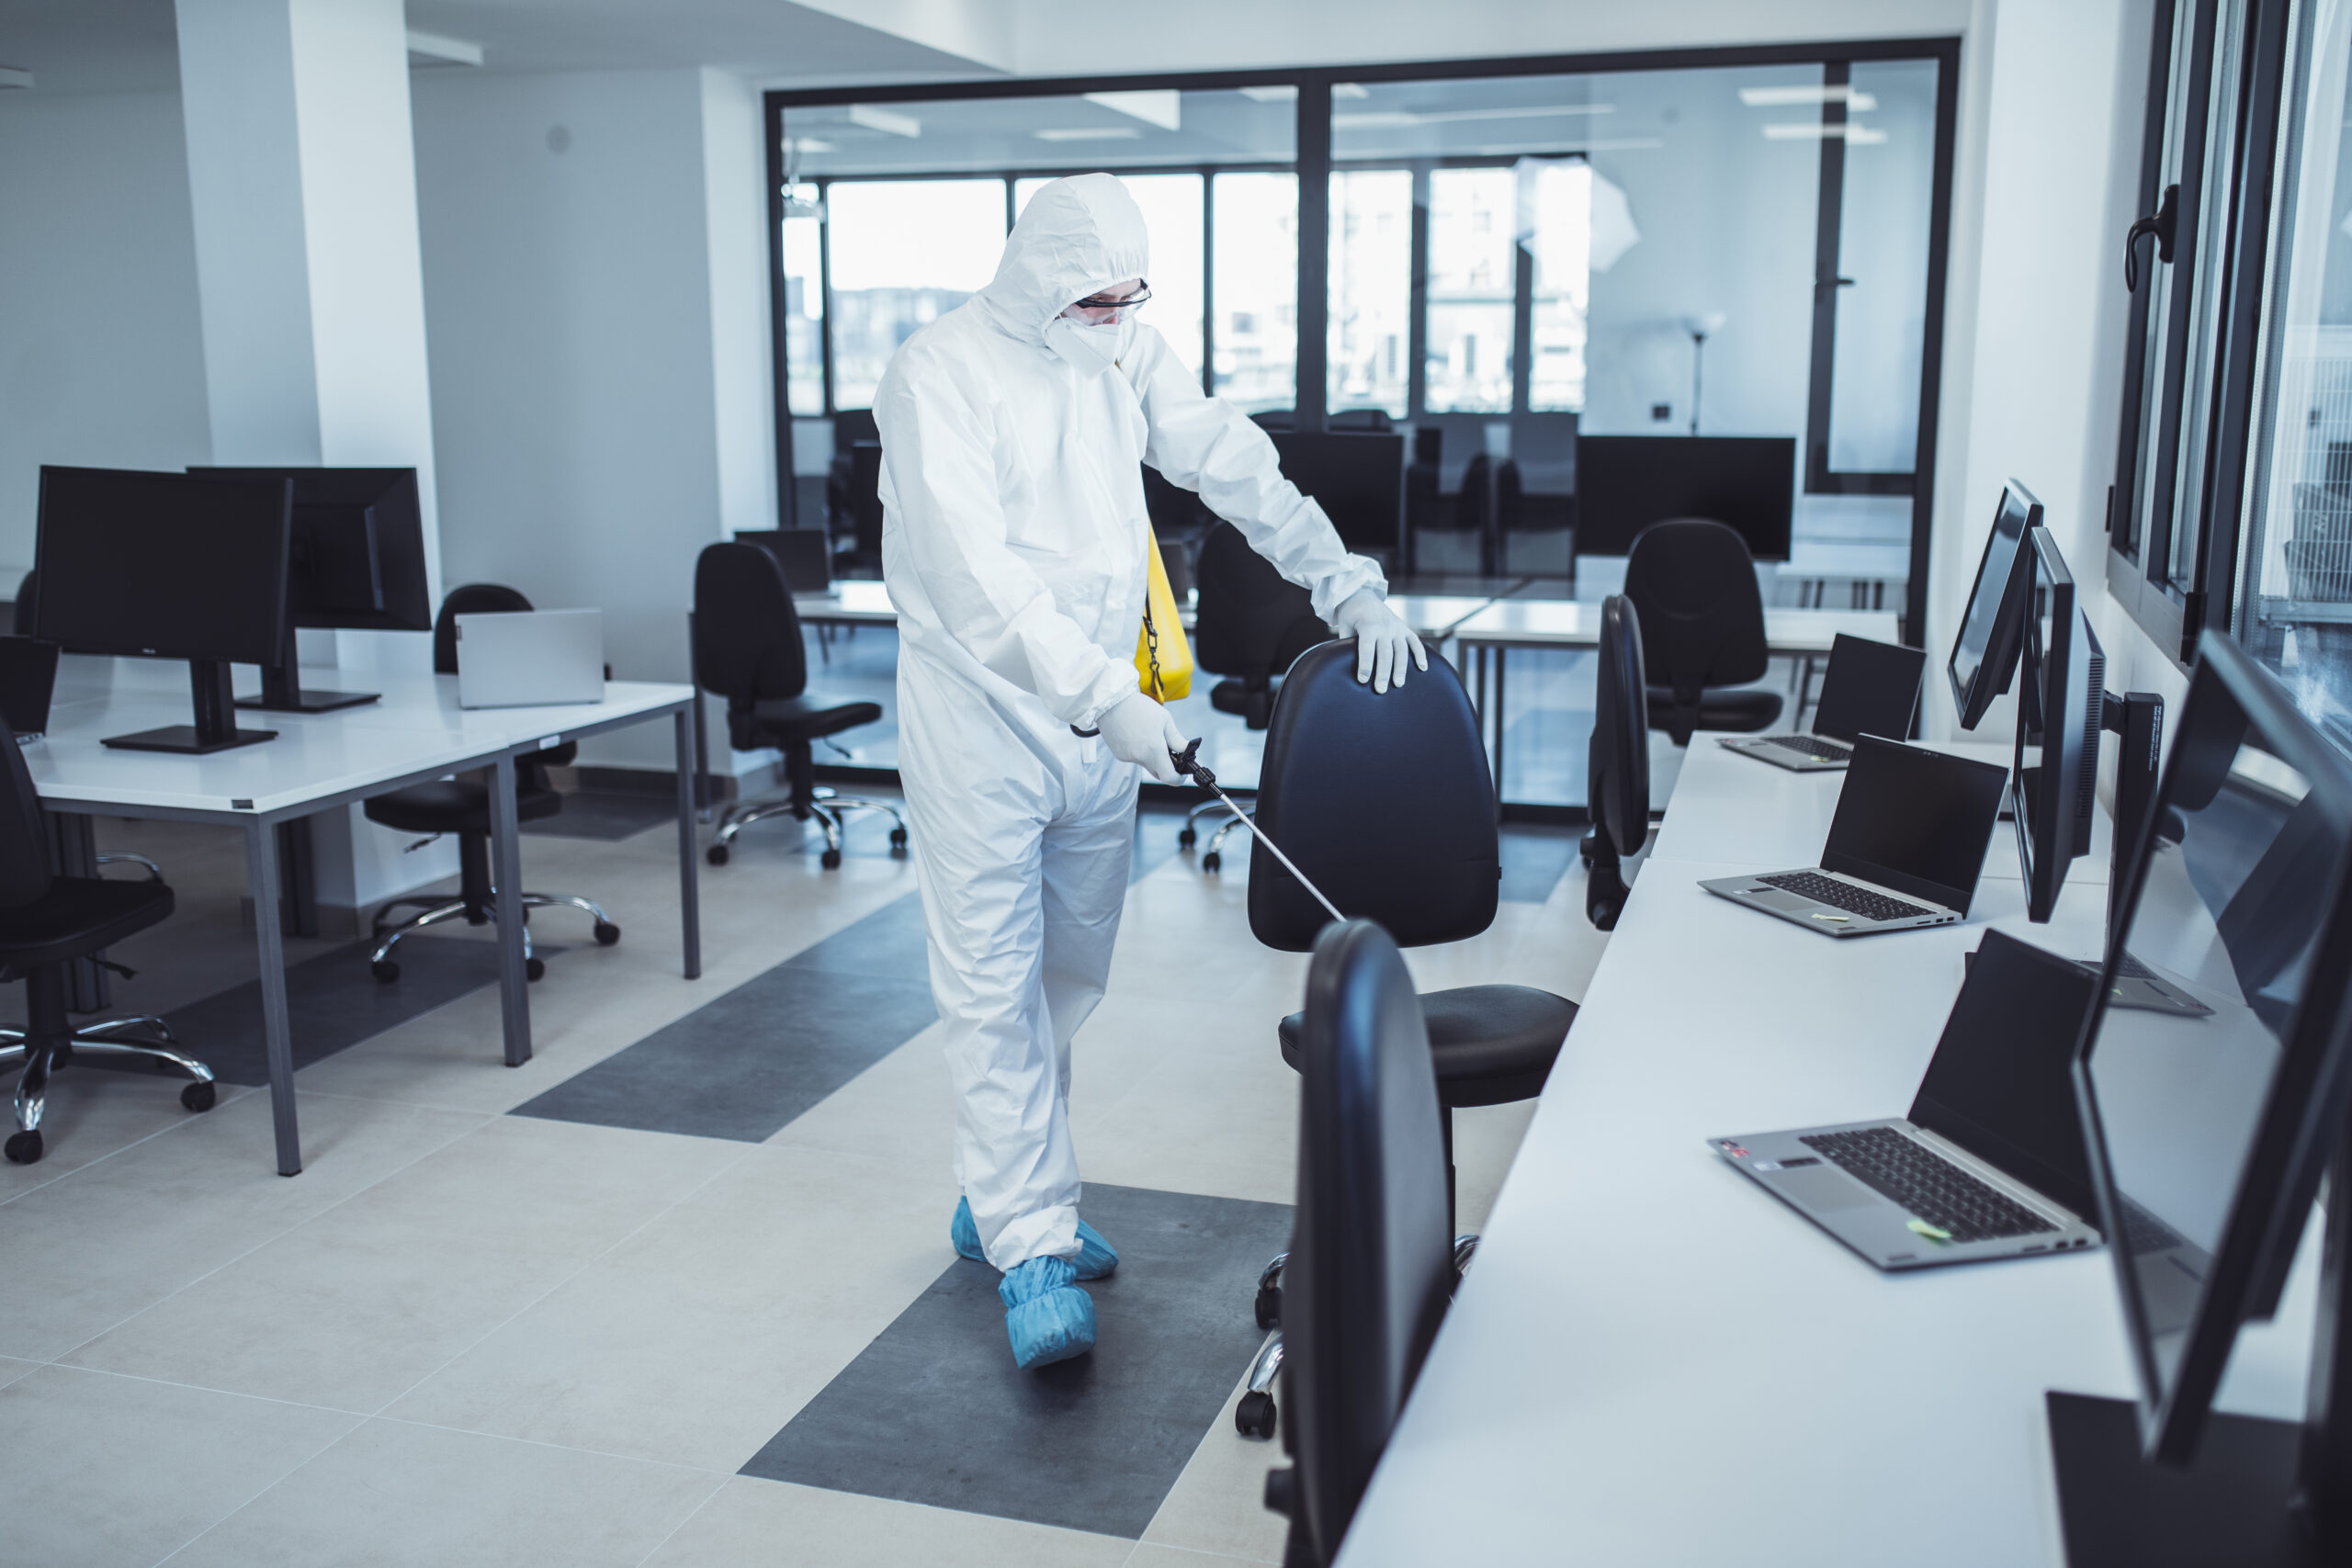 Unmatched Standards: What are the Best Professional Office Cleaning Companies Like?